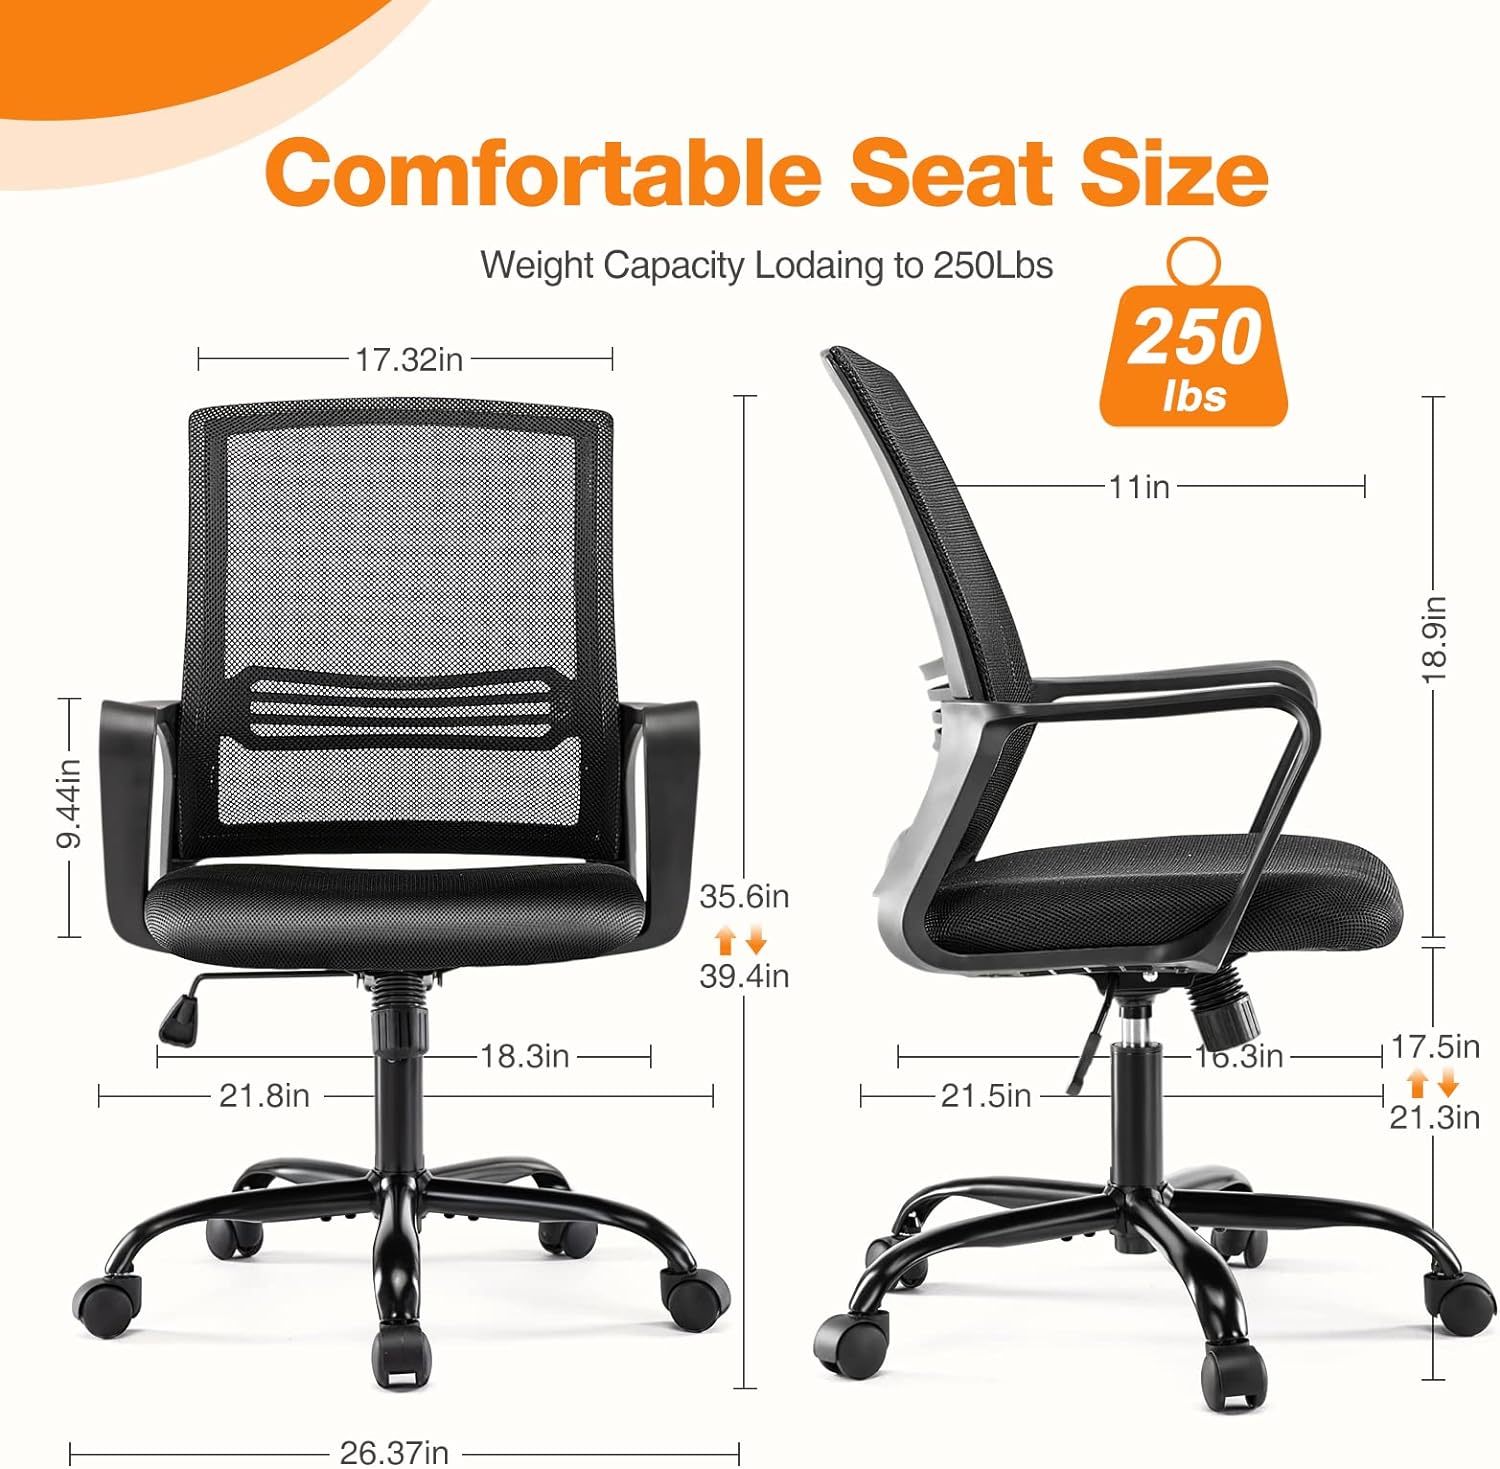 JHK Ergonomic Office Home Desk Mesh Fixed Armrest, Executive Computer Chair  with Soft Foam Seat Cushion and Lumbar Support, Black 